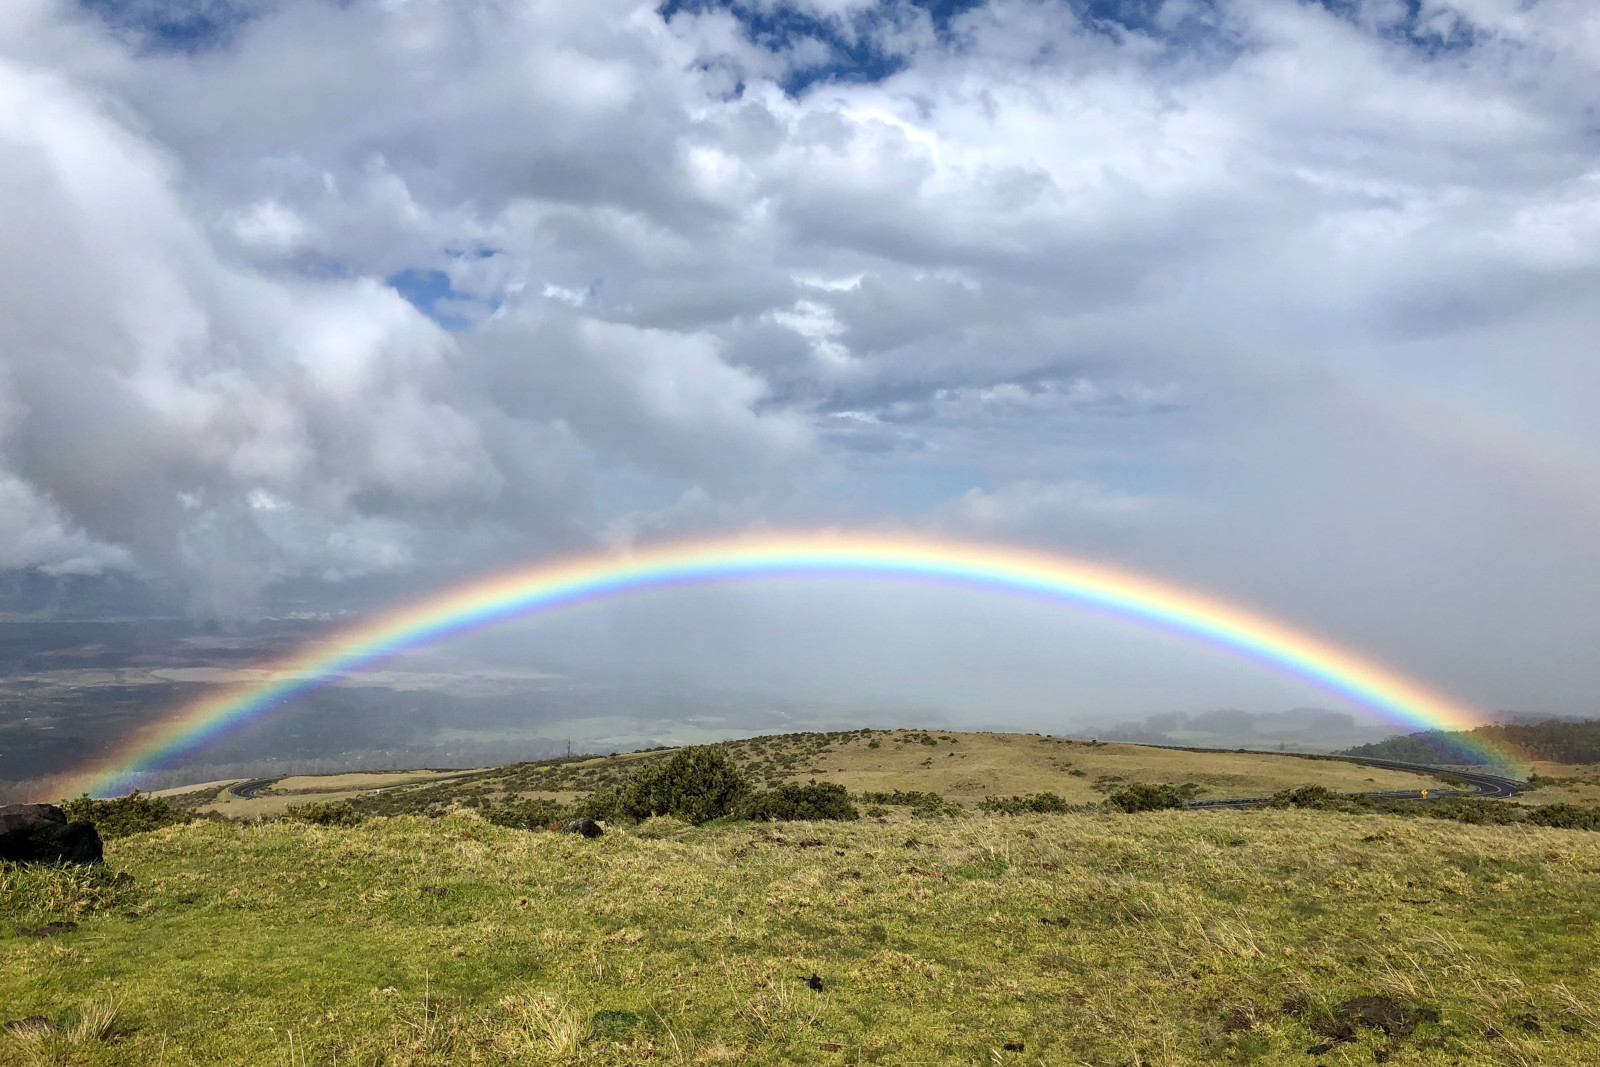 Rainbow over a landscape